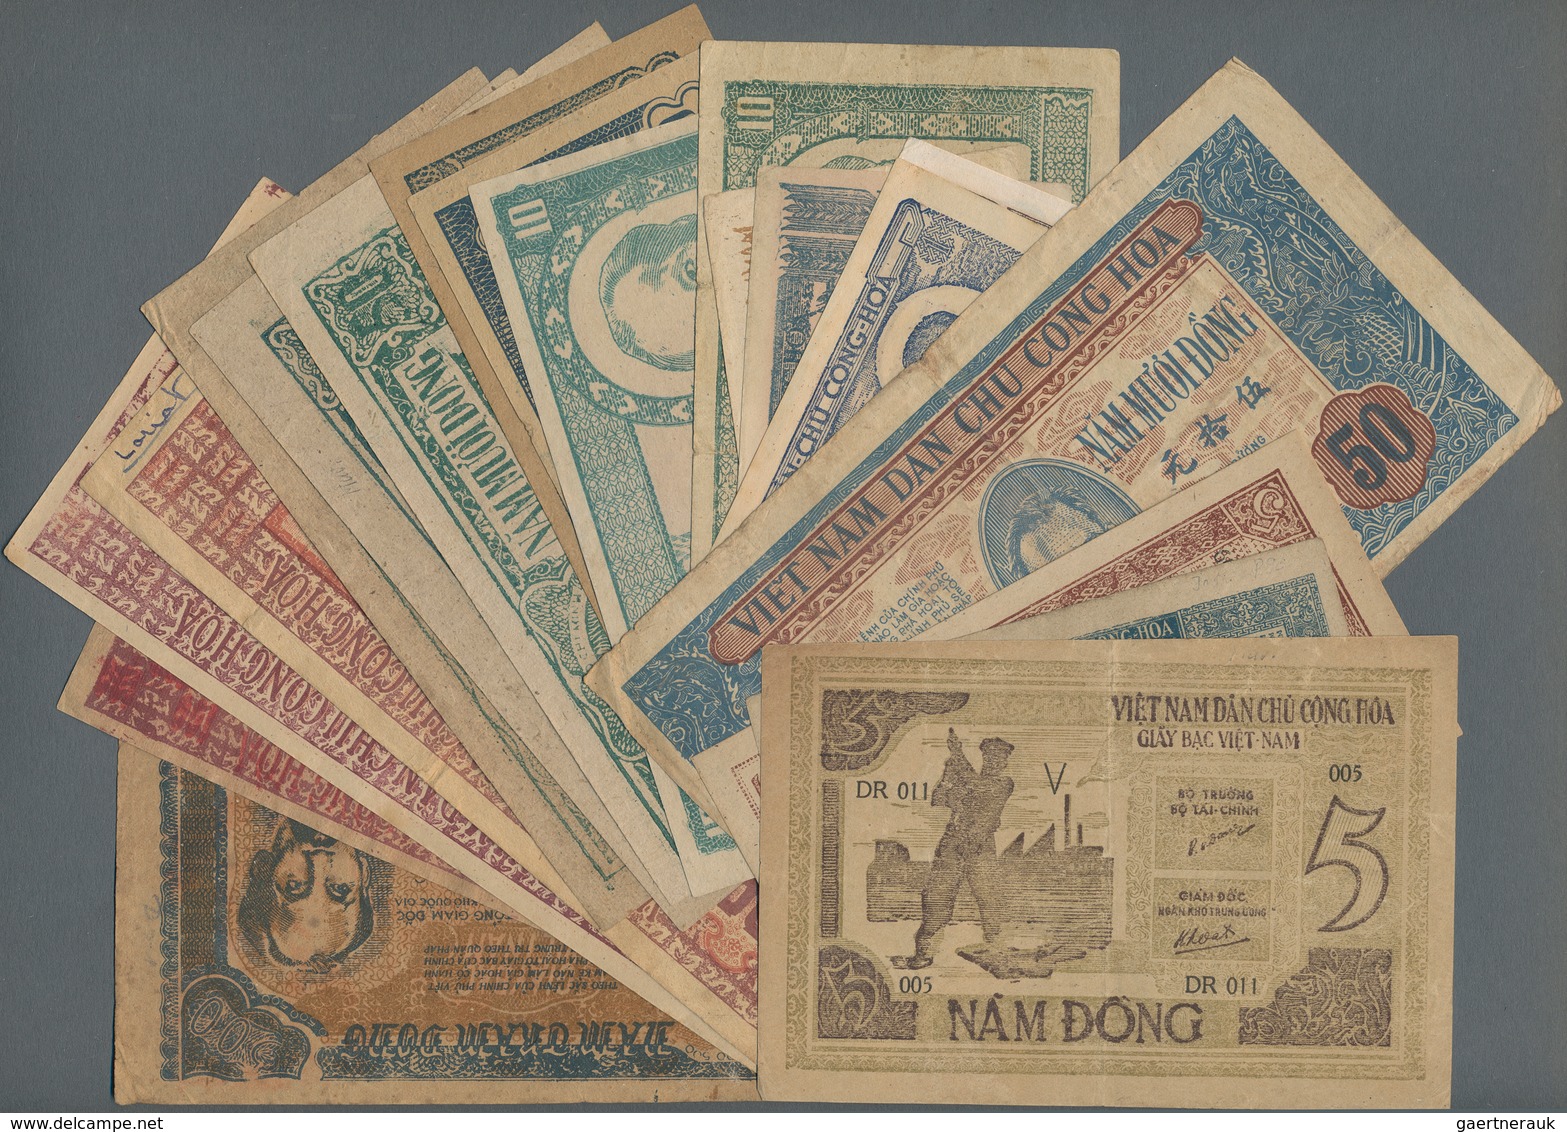 Vietnam: Very Nice Set With 20 Banknotes Of The Early Series Of North Vietnam From 1946-1949 Includi - Vietnam